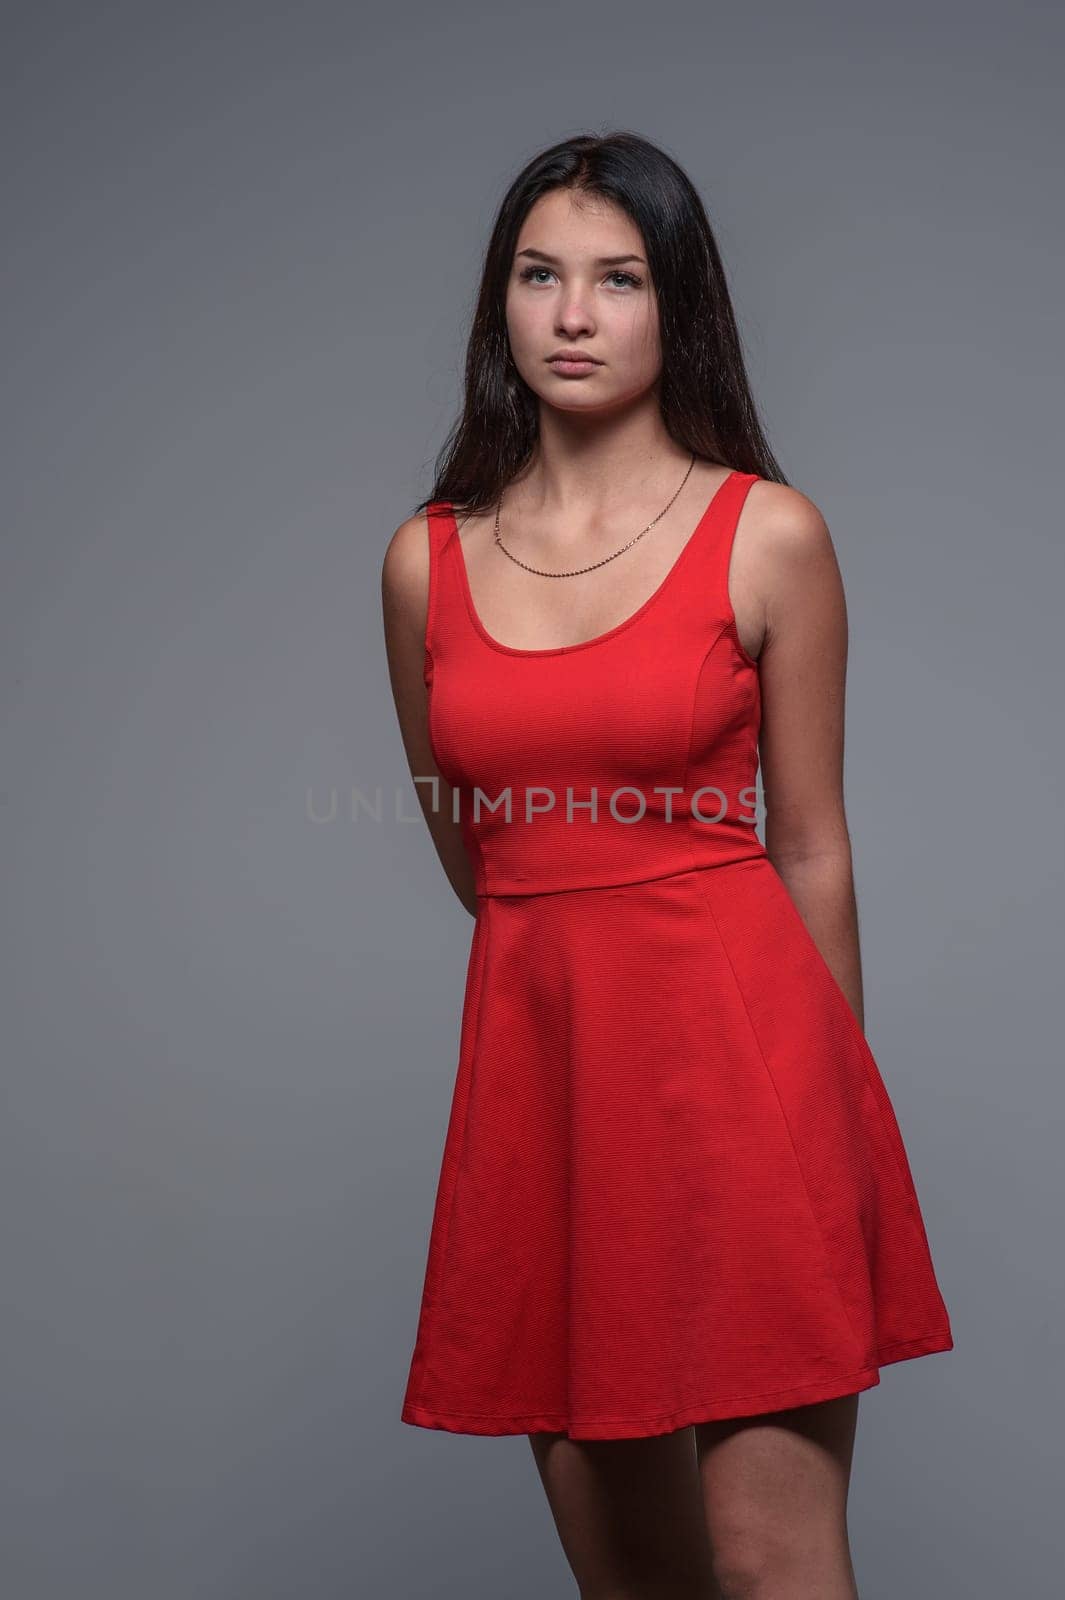 Studio portrait of a young beautiful girl in a red dress